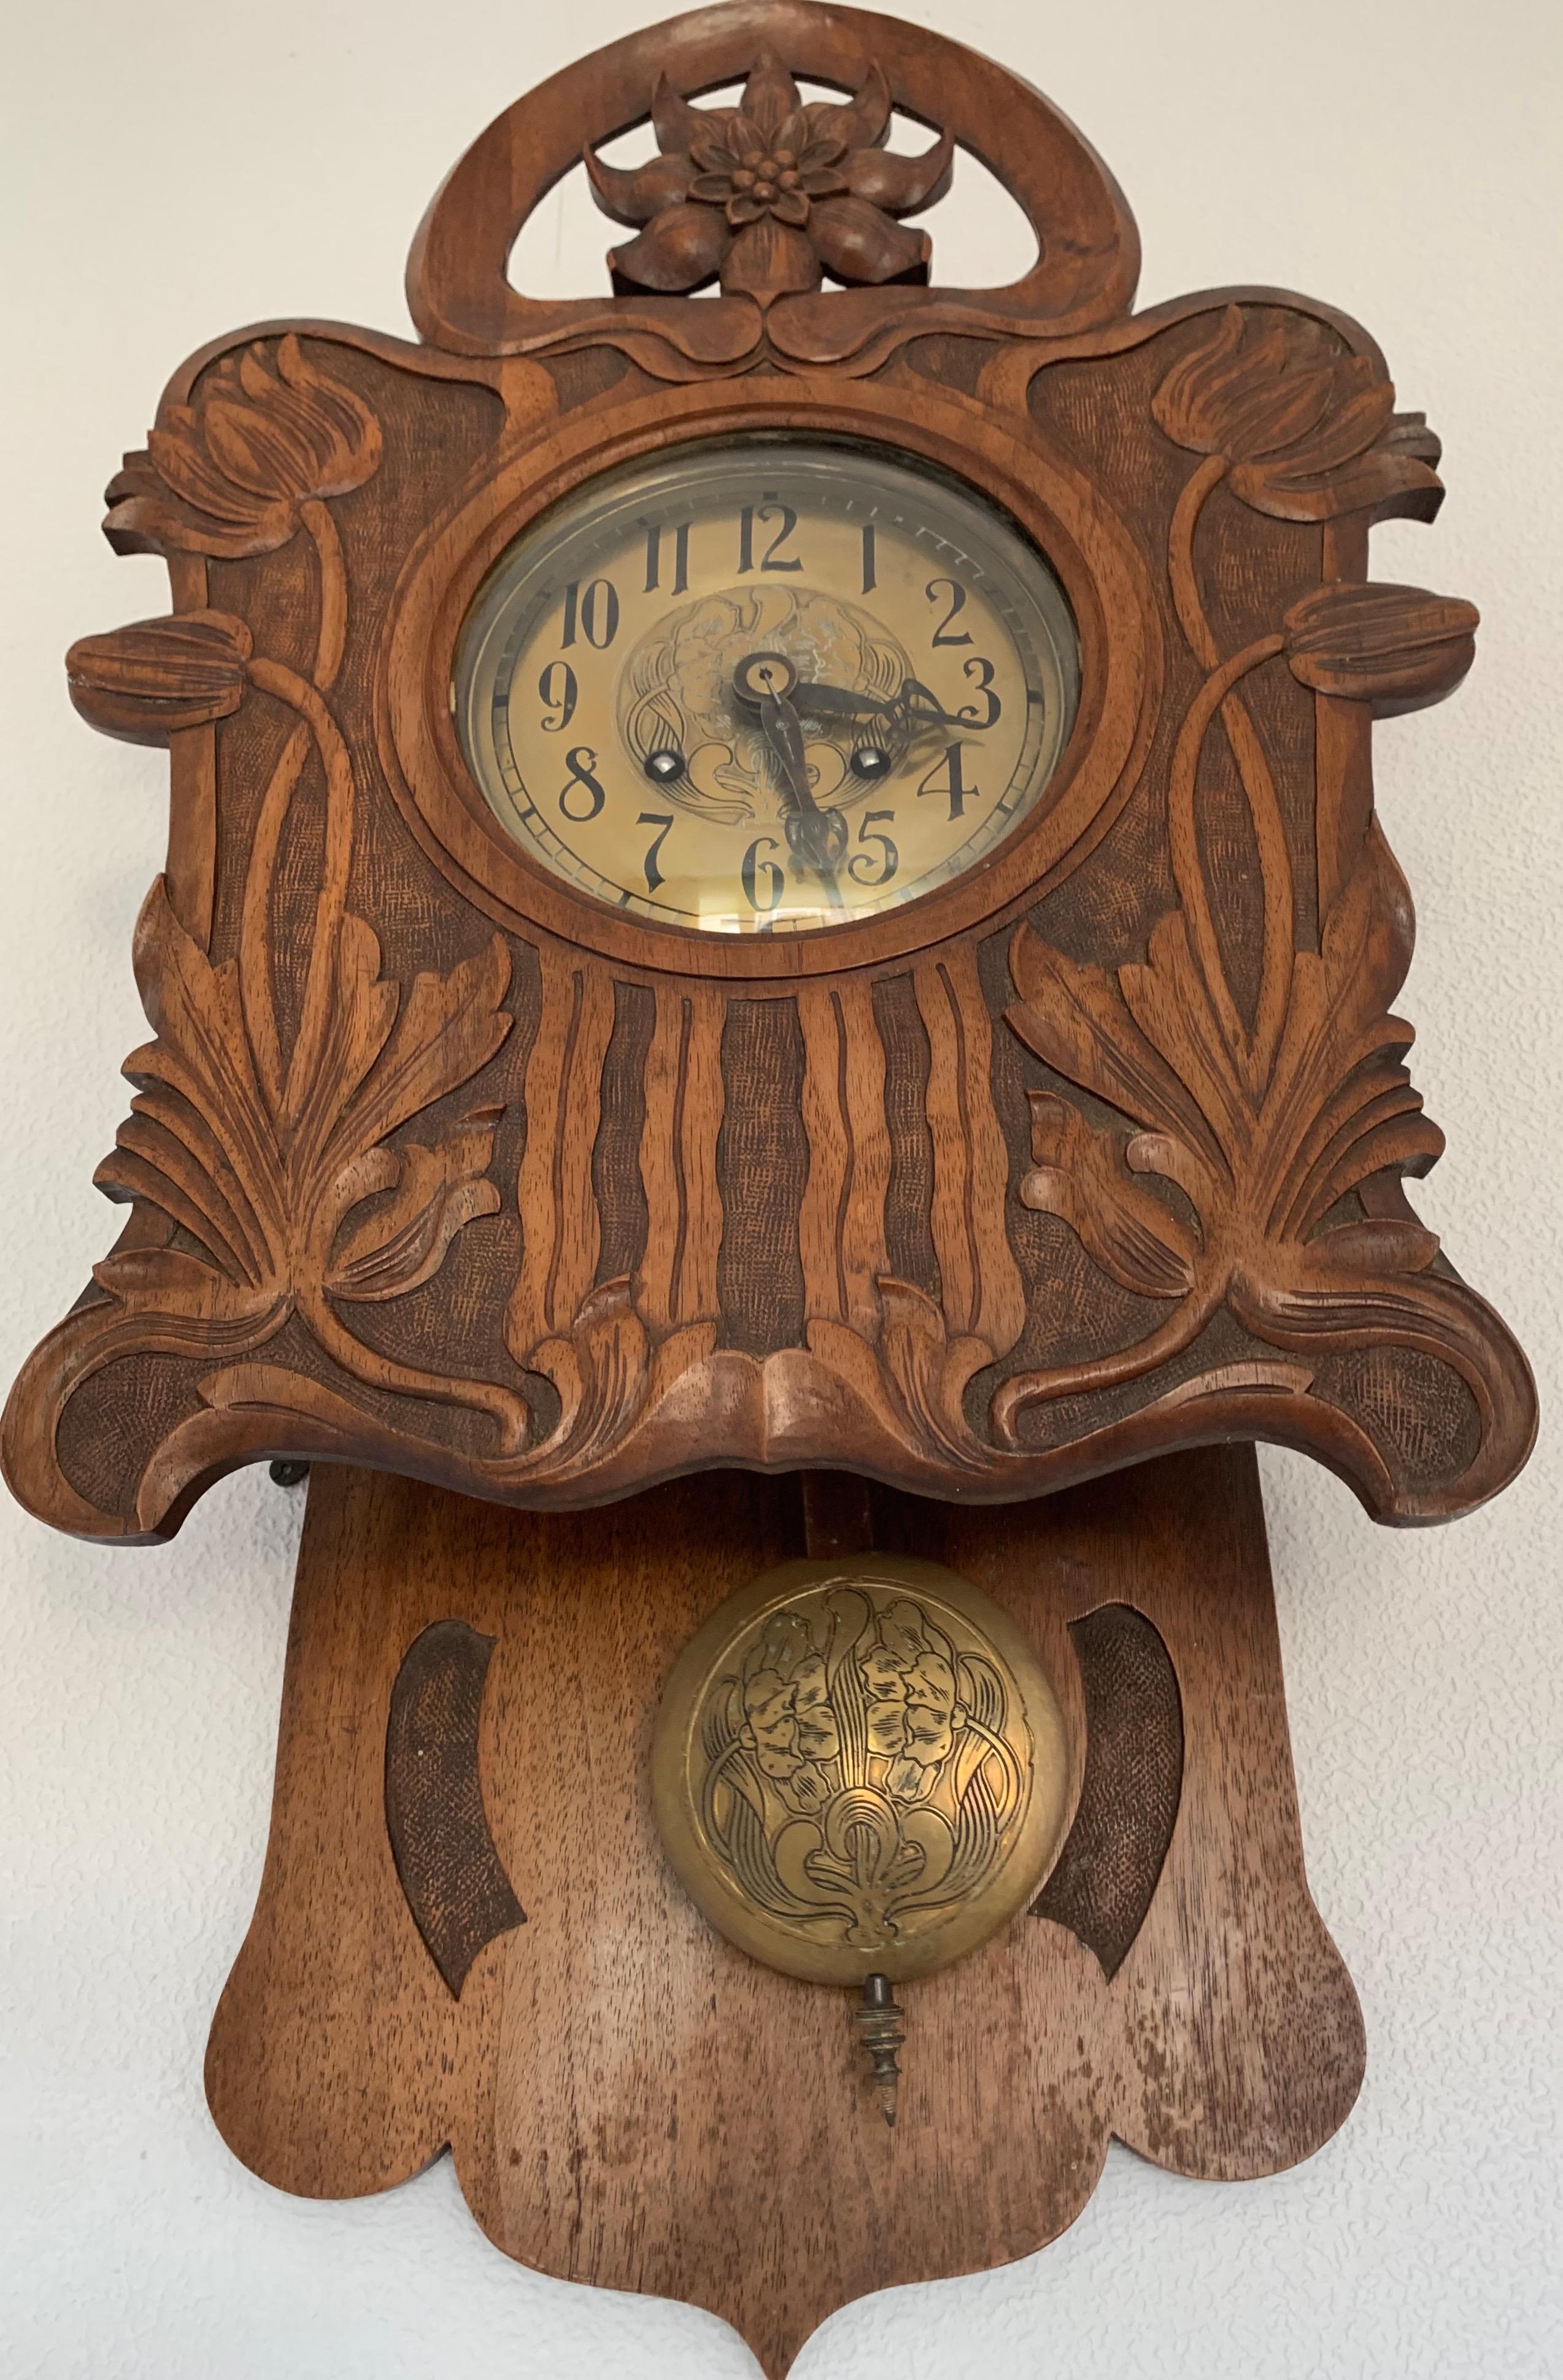 Early 20th century, great condition Jugendstil wall clock.

This hand carved and stunning Art Nouveau era clock has a beautiful color / patina and it is in wonderful condition, from top to bottom. The organic and floral carvings are exactly as you